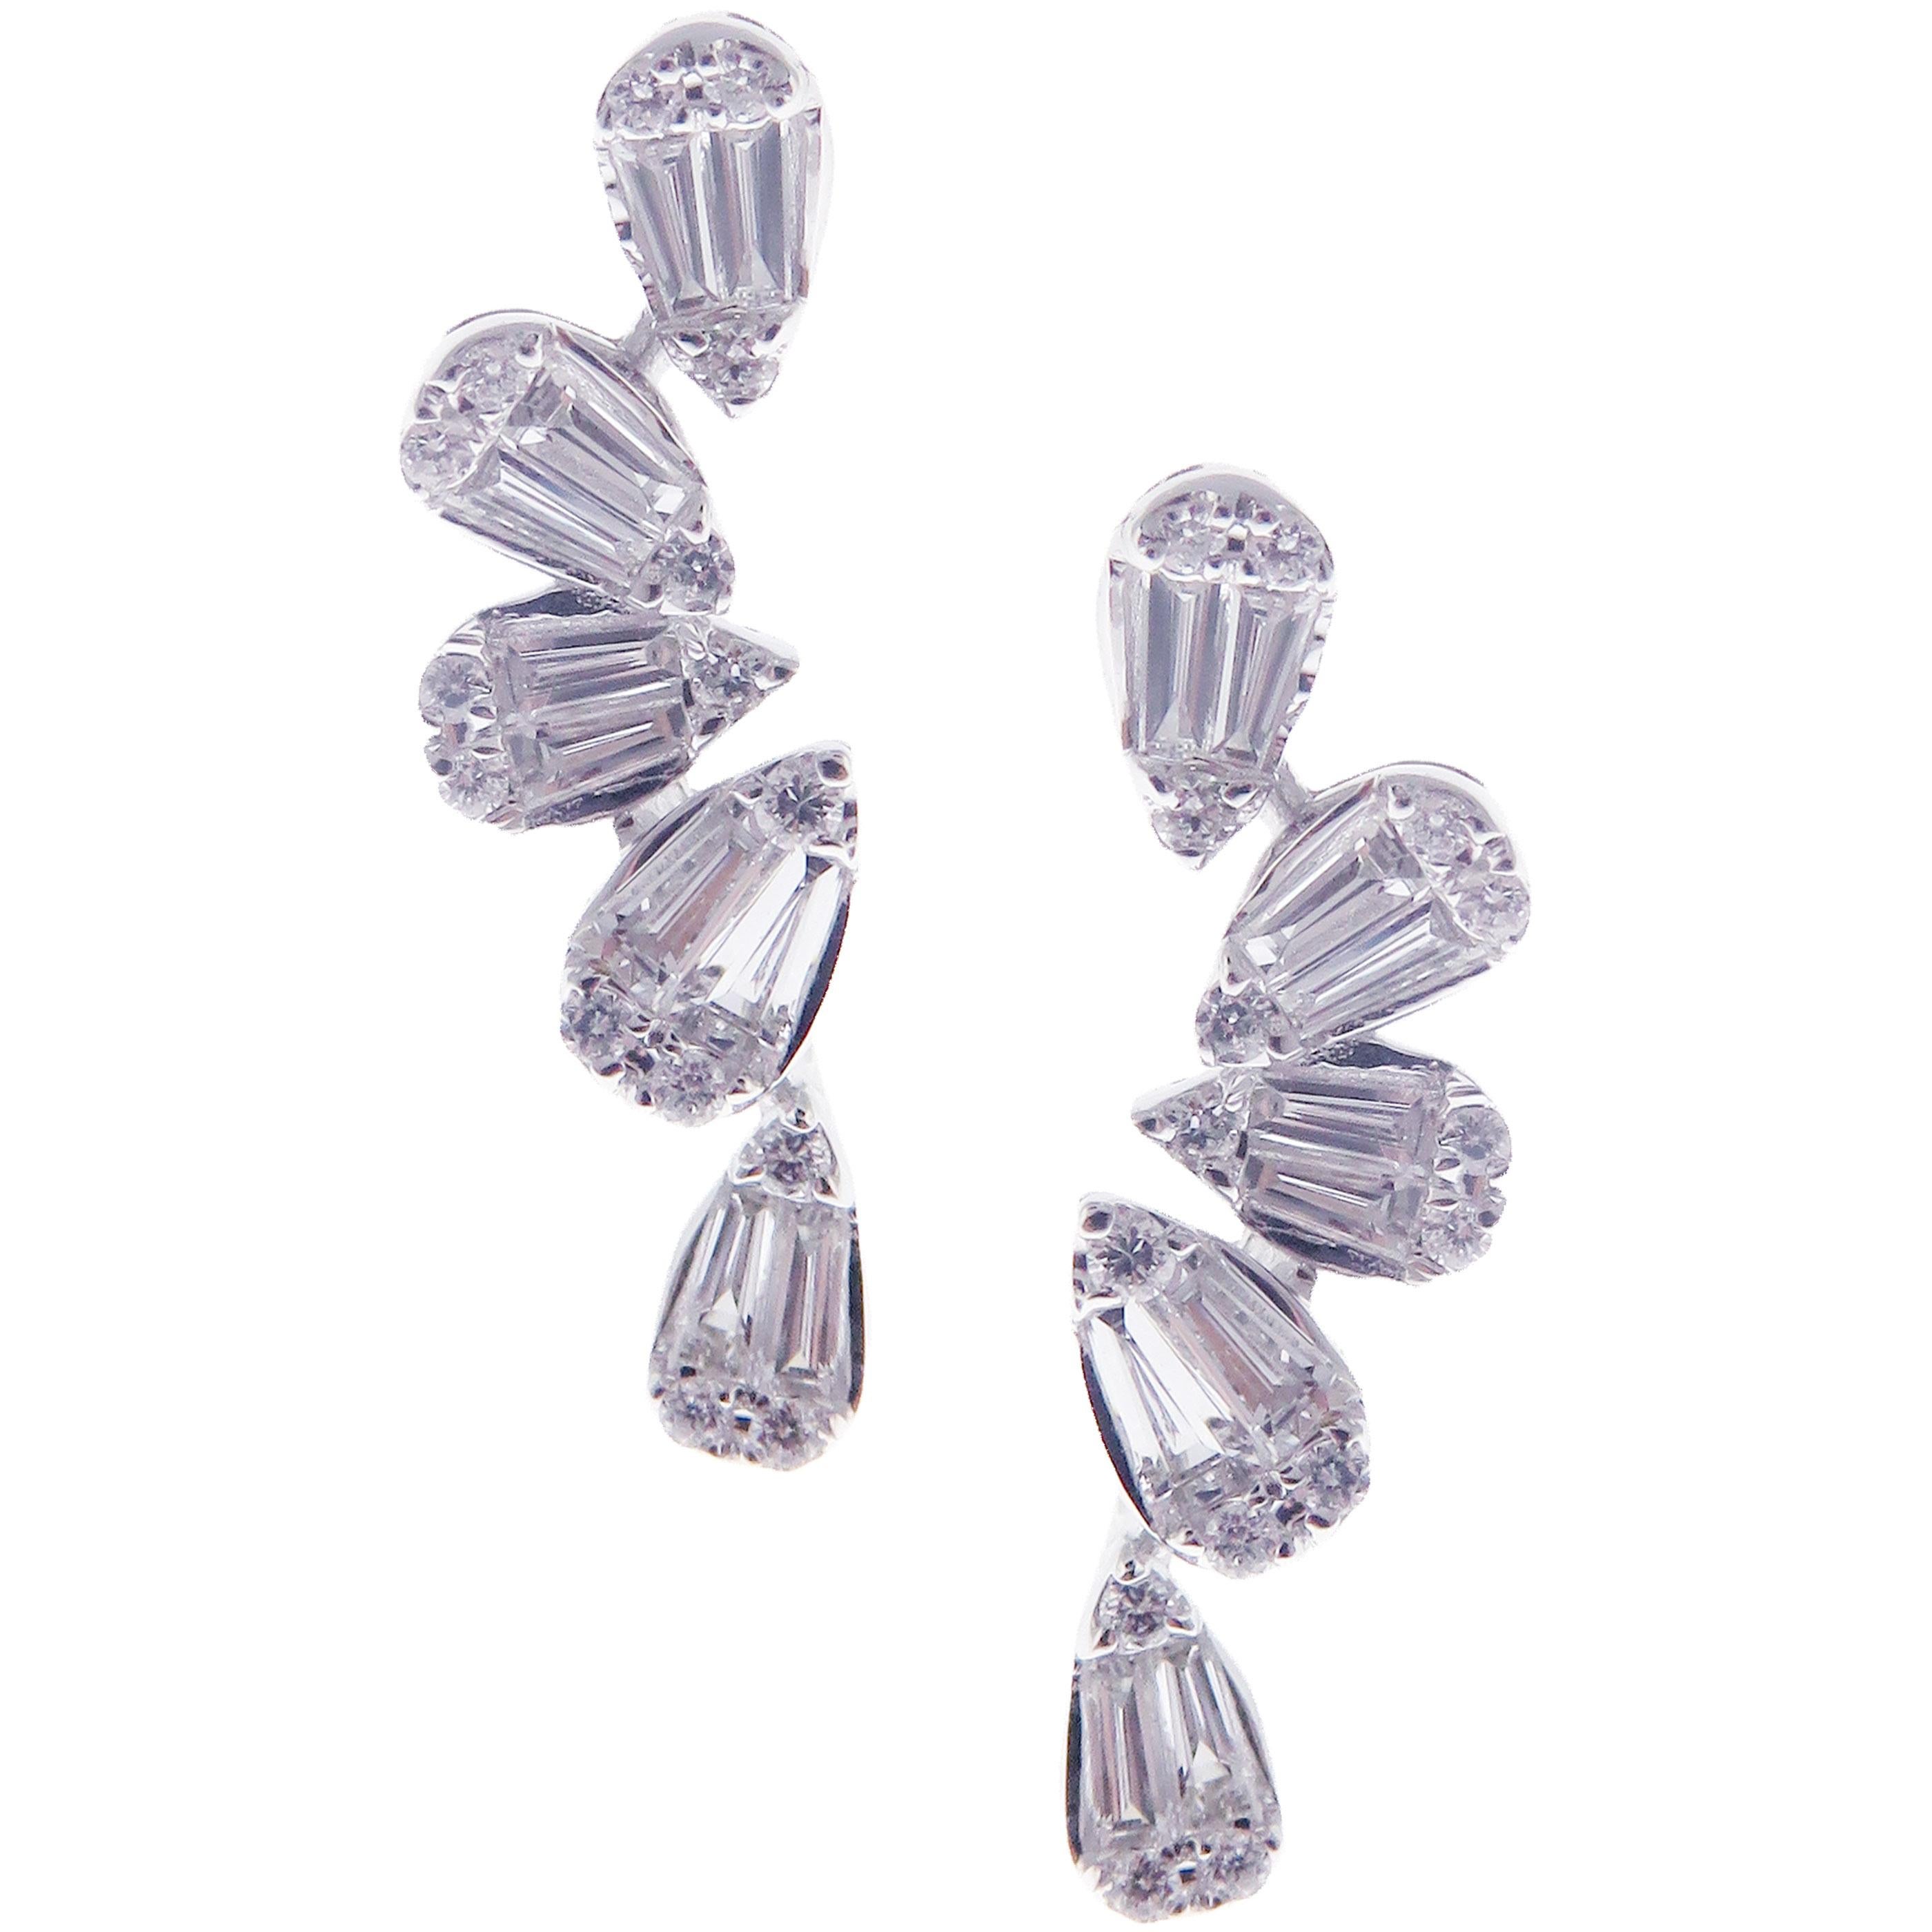 These trendy round and baguette diamond illusion crawler earrings are crafted in 18-karat white gold, featuring 30 round white diamonds totaling of 0.12 carats and 20 baguette white diamonds totaling of 0.52 carats.
Approximately total weight 3.63